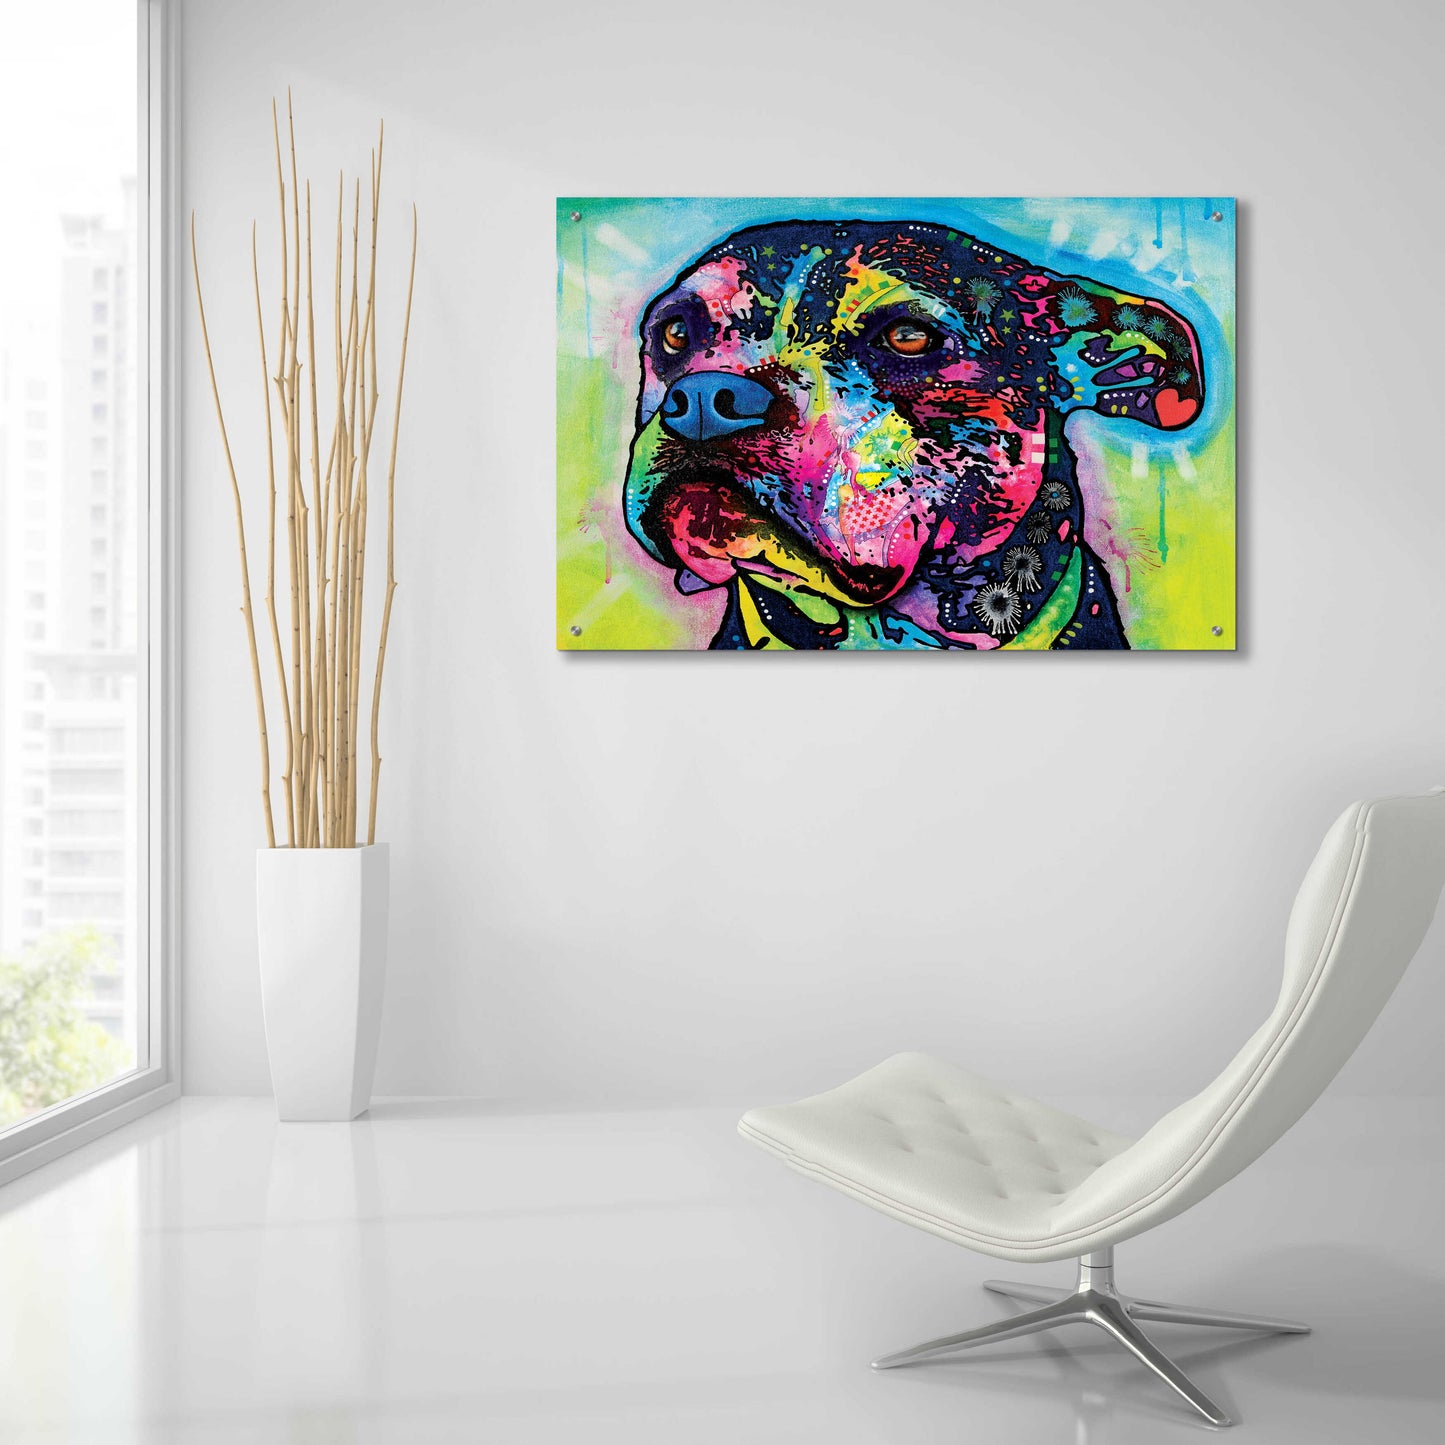 Epic Art 'Anni' by Dean Russo, Acrylic Glass Wall Art,36x24